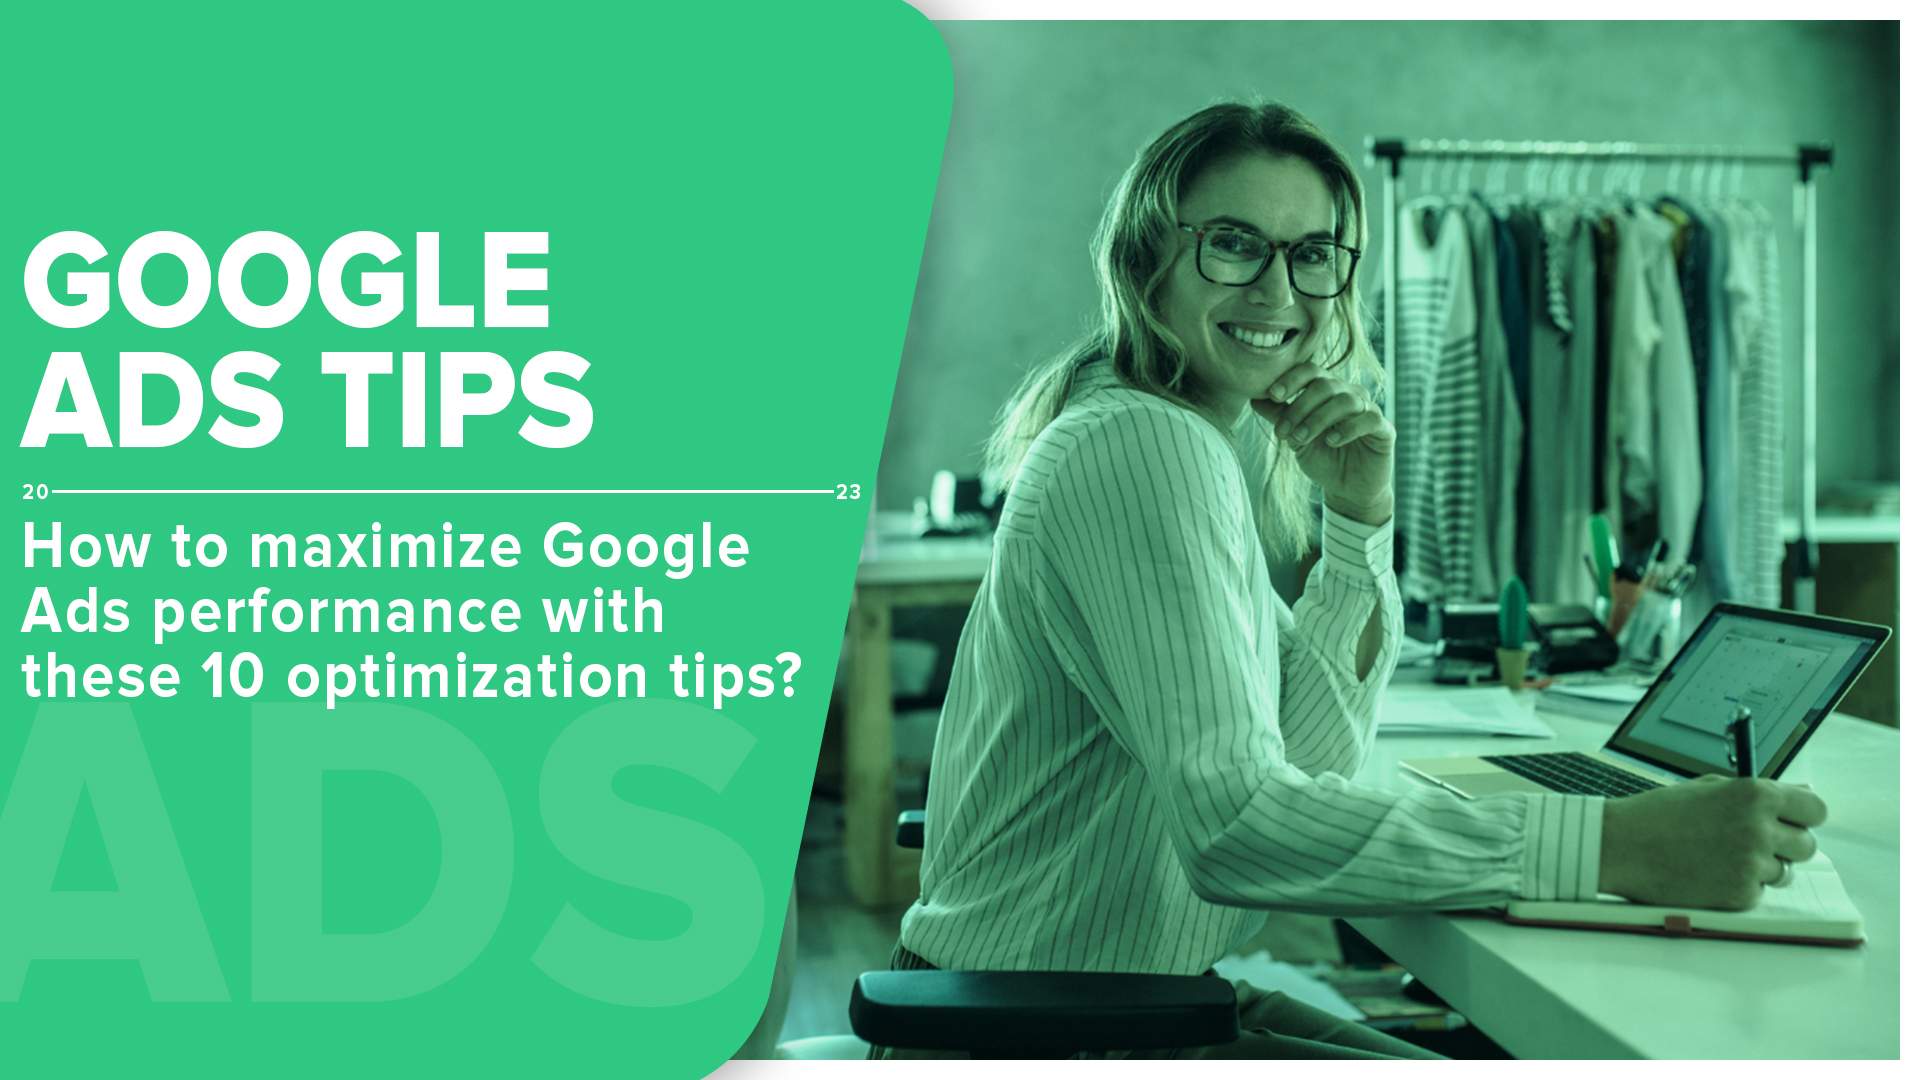 10 Google Ads optimization tips to maximize performance blog post cover image.